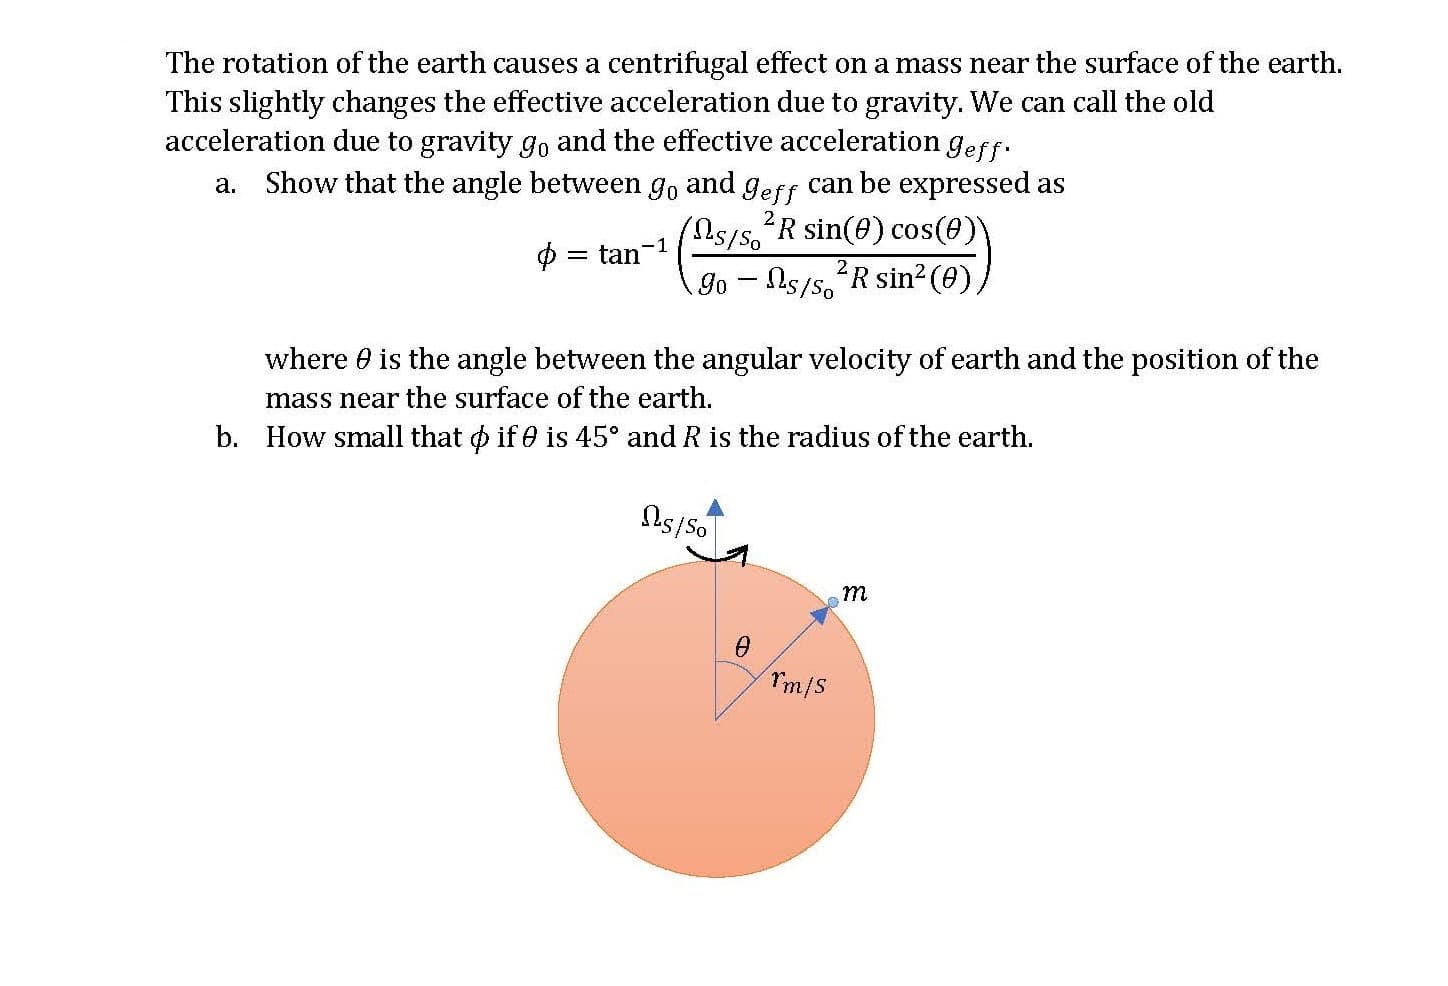 The rotation of the earth causes a centrifugal effect on a mass near the surface of the earth.
This slightly changes the effective acceleration due to gravity. We can call the old
acceleration due to gravity go and the effective acceleration geff:
a. Show that the angle between go and geff can be expressed as
2R sin(0) cos(e)\
P = tan-1
9o - Ns/s,R sin2 (0)
where e is the angle between the angular velocity of earth and the position of the
mass near the surface of the earth.
b. How small that o if e is 45° and R is the radius of the earth.
Ns/So
m
Tm/S
